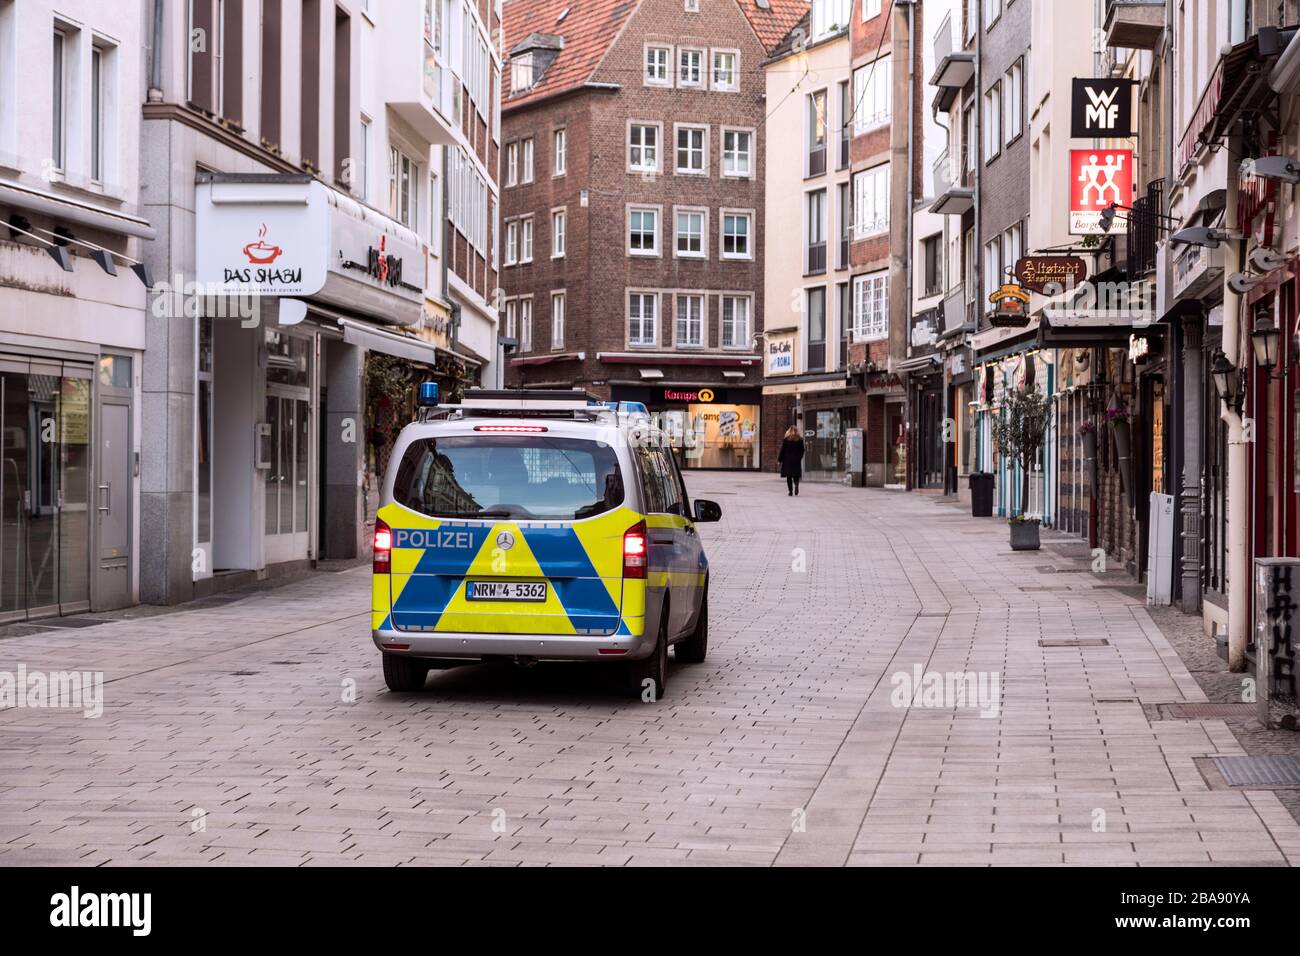 Police drive patrol to control the ban on contact with the coronavirus pandemic in the Alstadt pub and shopping district of Dusseldorf. Stock Photo